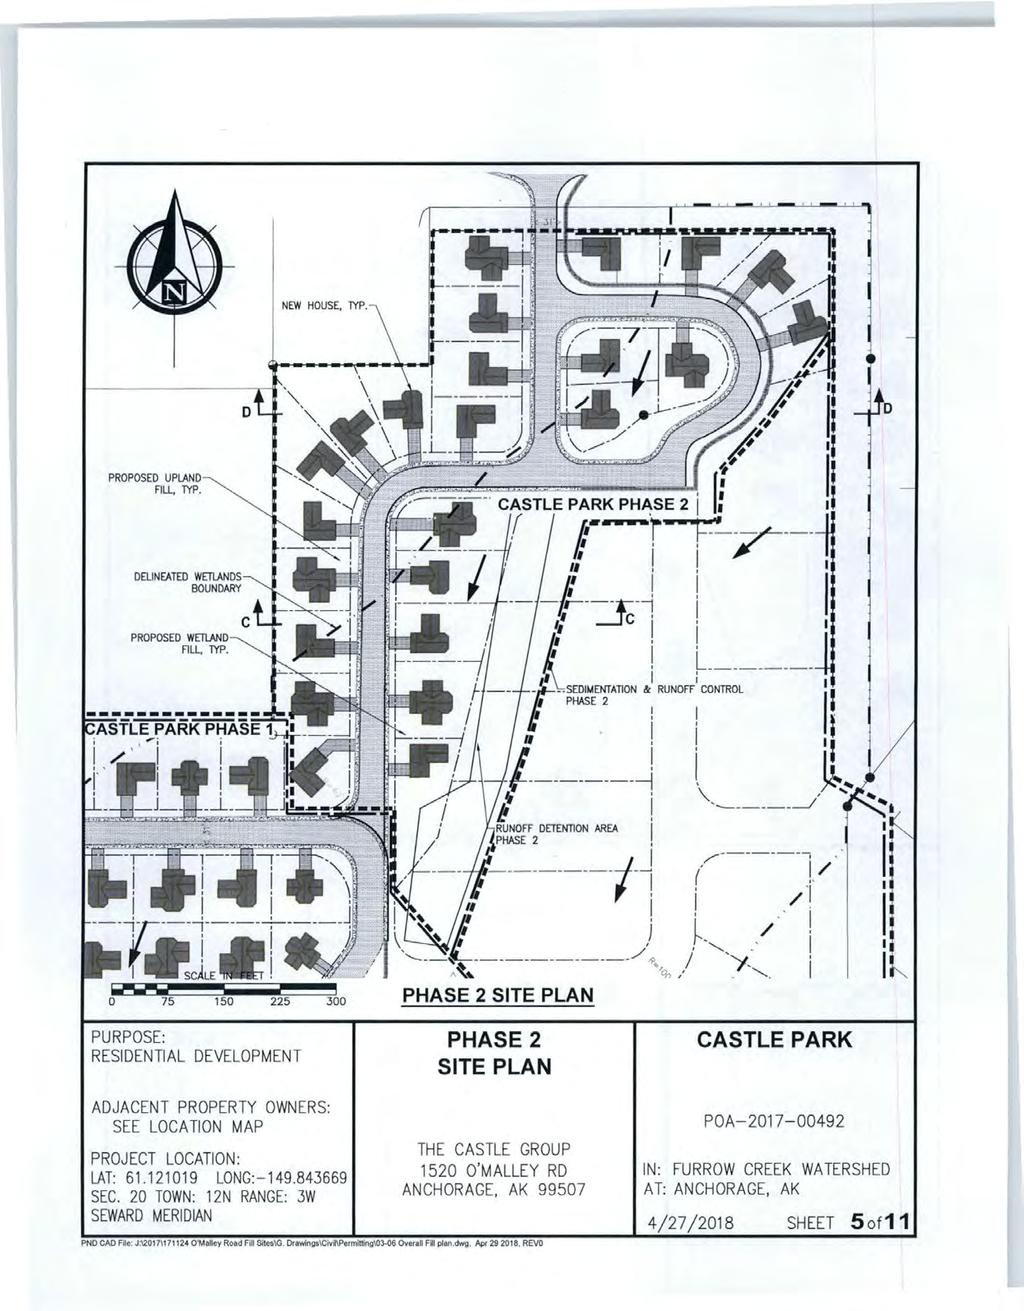 PROPOSED UPLAND Fill., TYP. I 11 PHASE 2 SITE PLAN PHASE 2 SITE PLAN PROJECT LOCATION : LAT: 61.121019 LONG:-149.